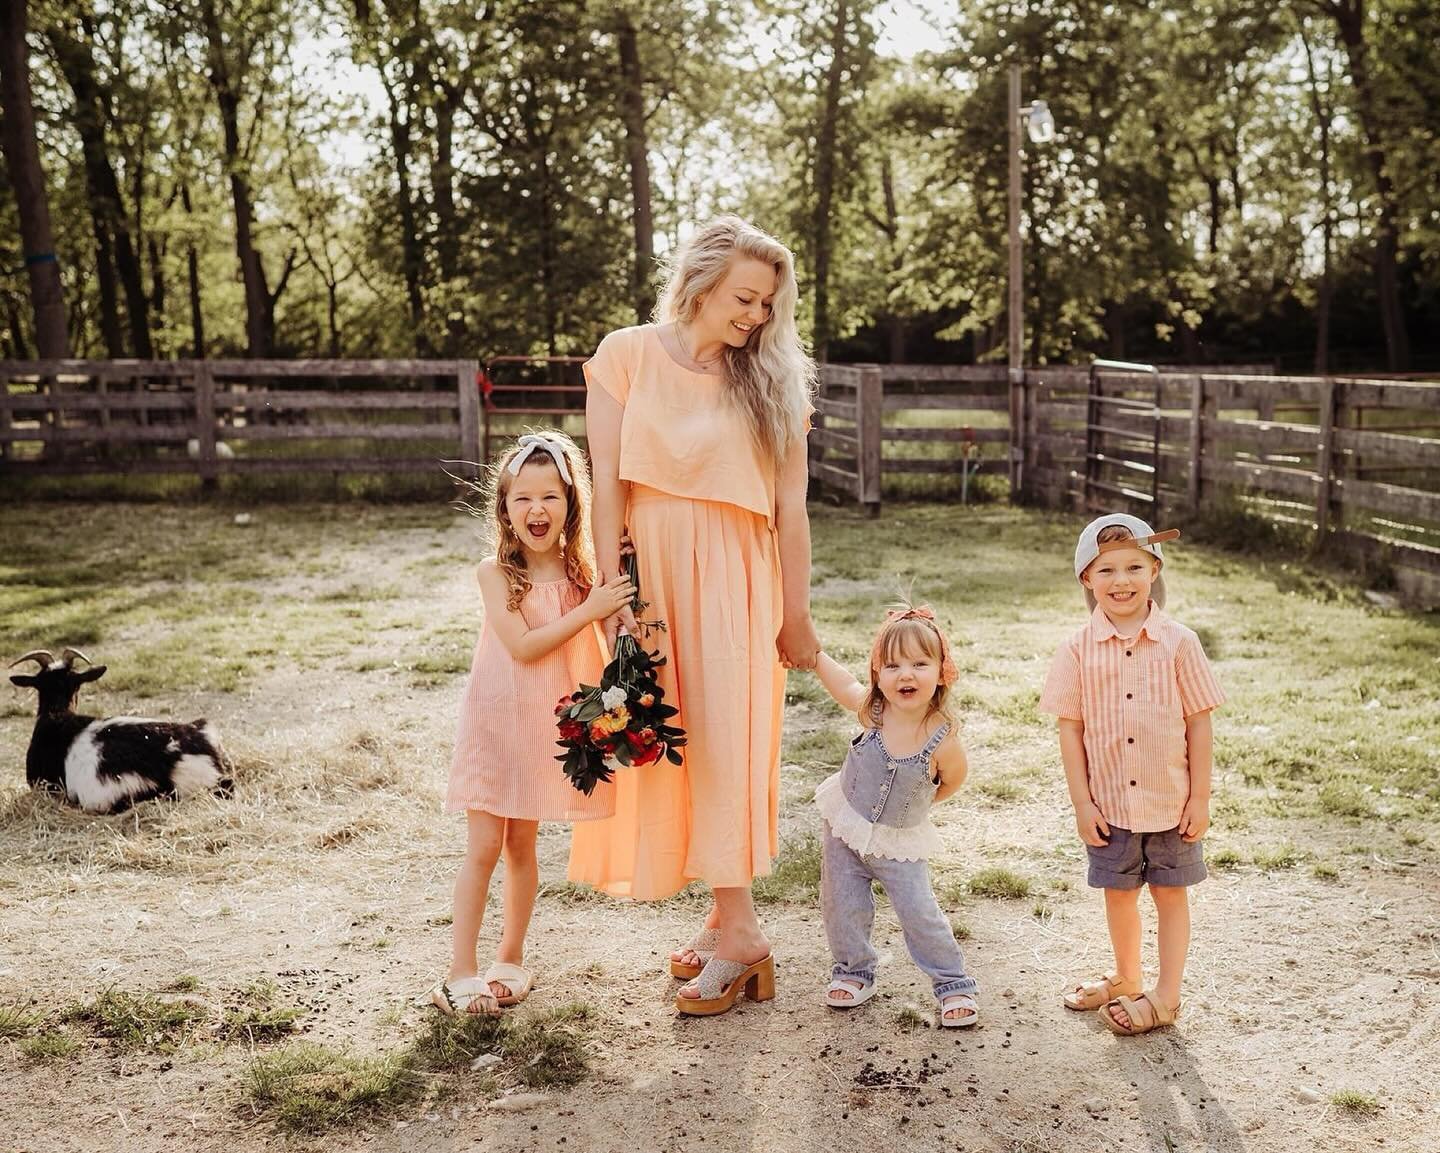 And the final flower garden mini session to share! These darlings and their stunning mama are just full of personality. I love the beautiful pops of color! Thank you again @gracegardensfloral for inviting me to your magical farm and allowing me to ca